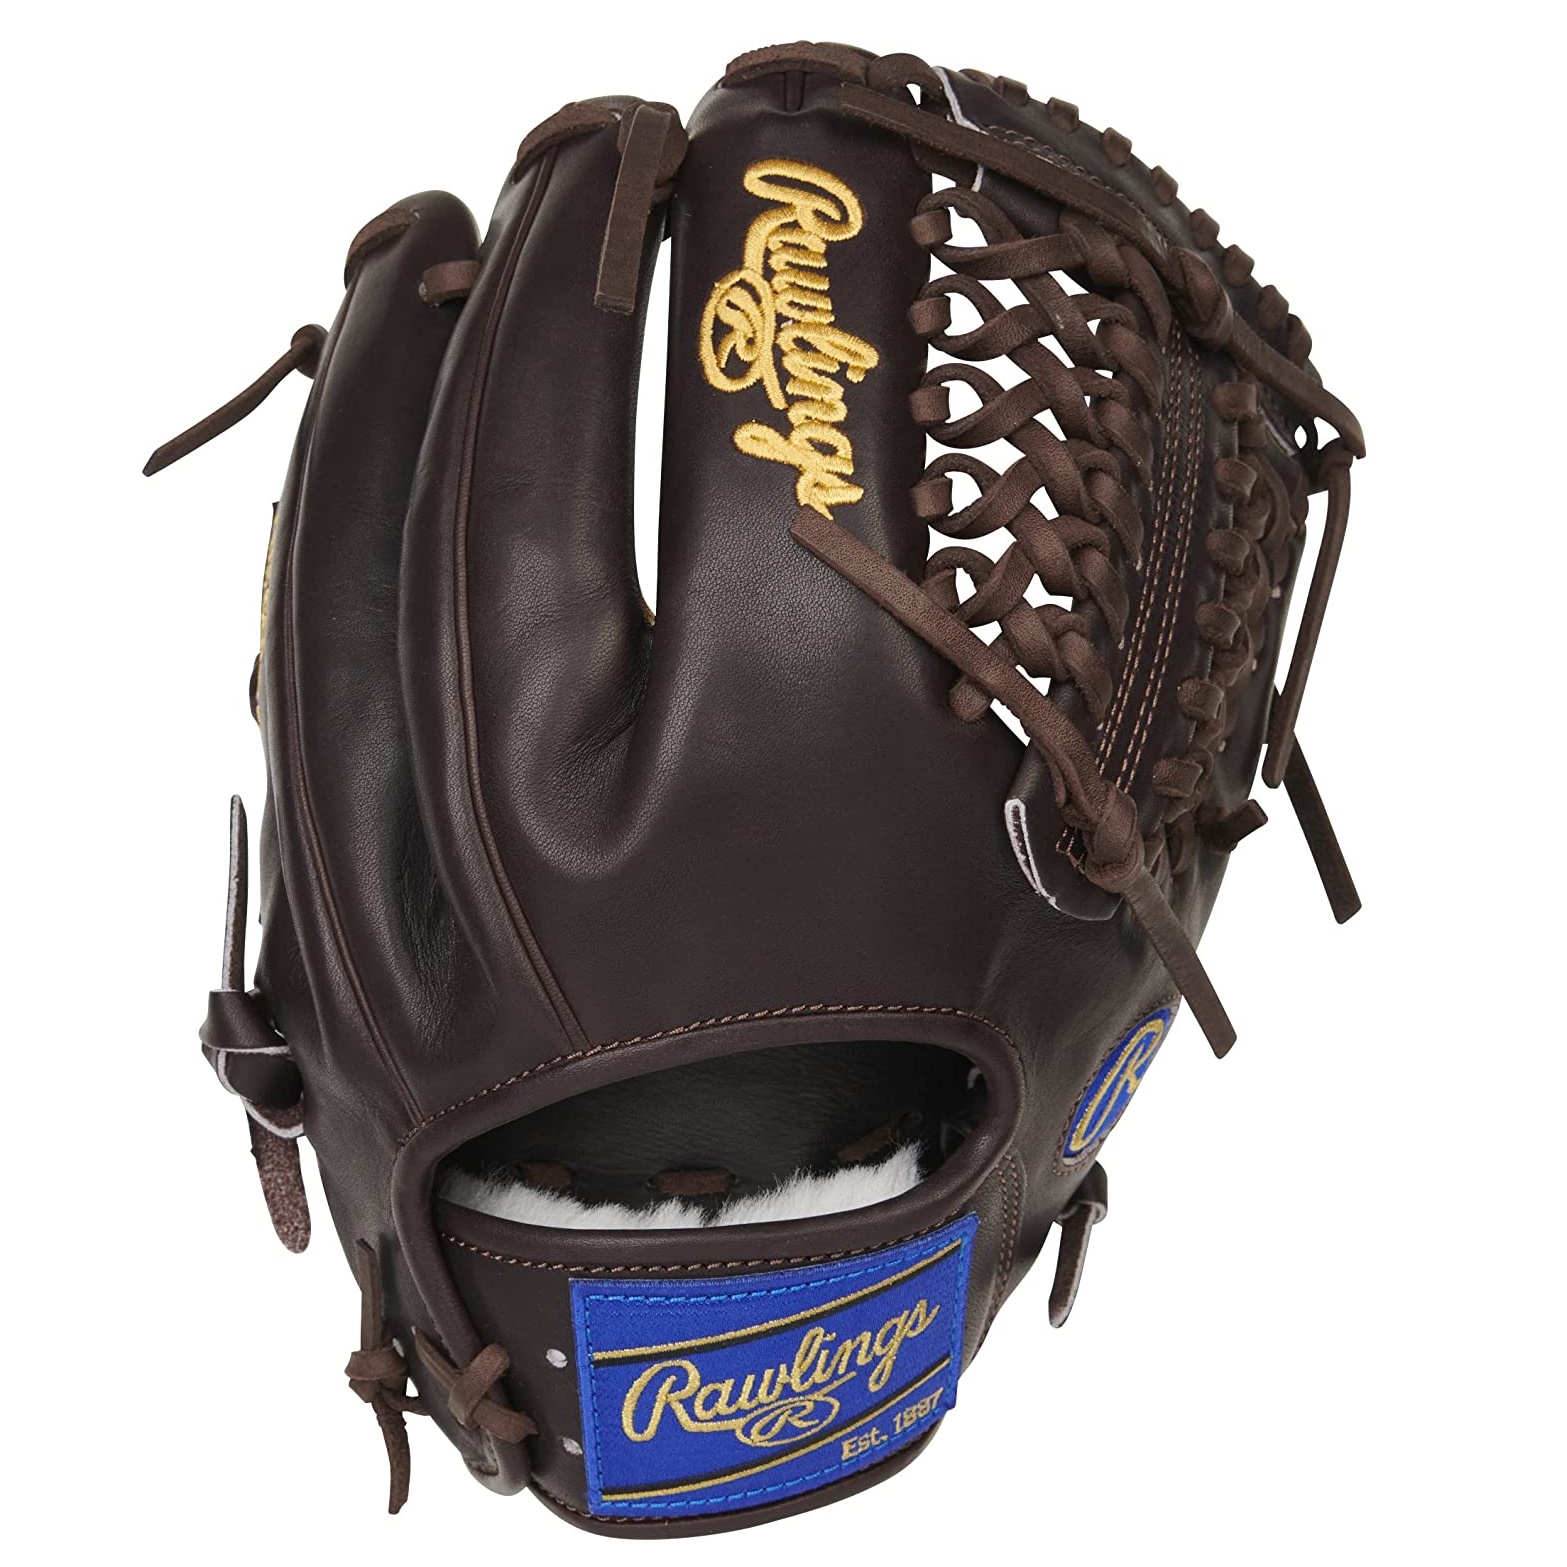 rawlings-pro-preferred-baseball-glove-11-75-inch-mocha-right-hand-throw PROS205-4MO-RightHandThrow Rawlings  The Rawlings Pro Preferred line of baseball gloves are a standout